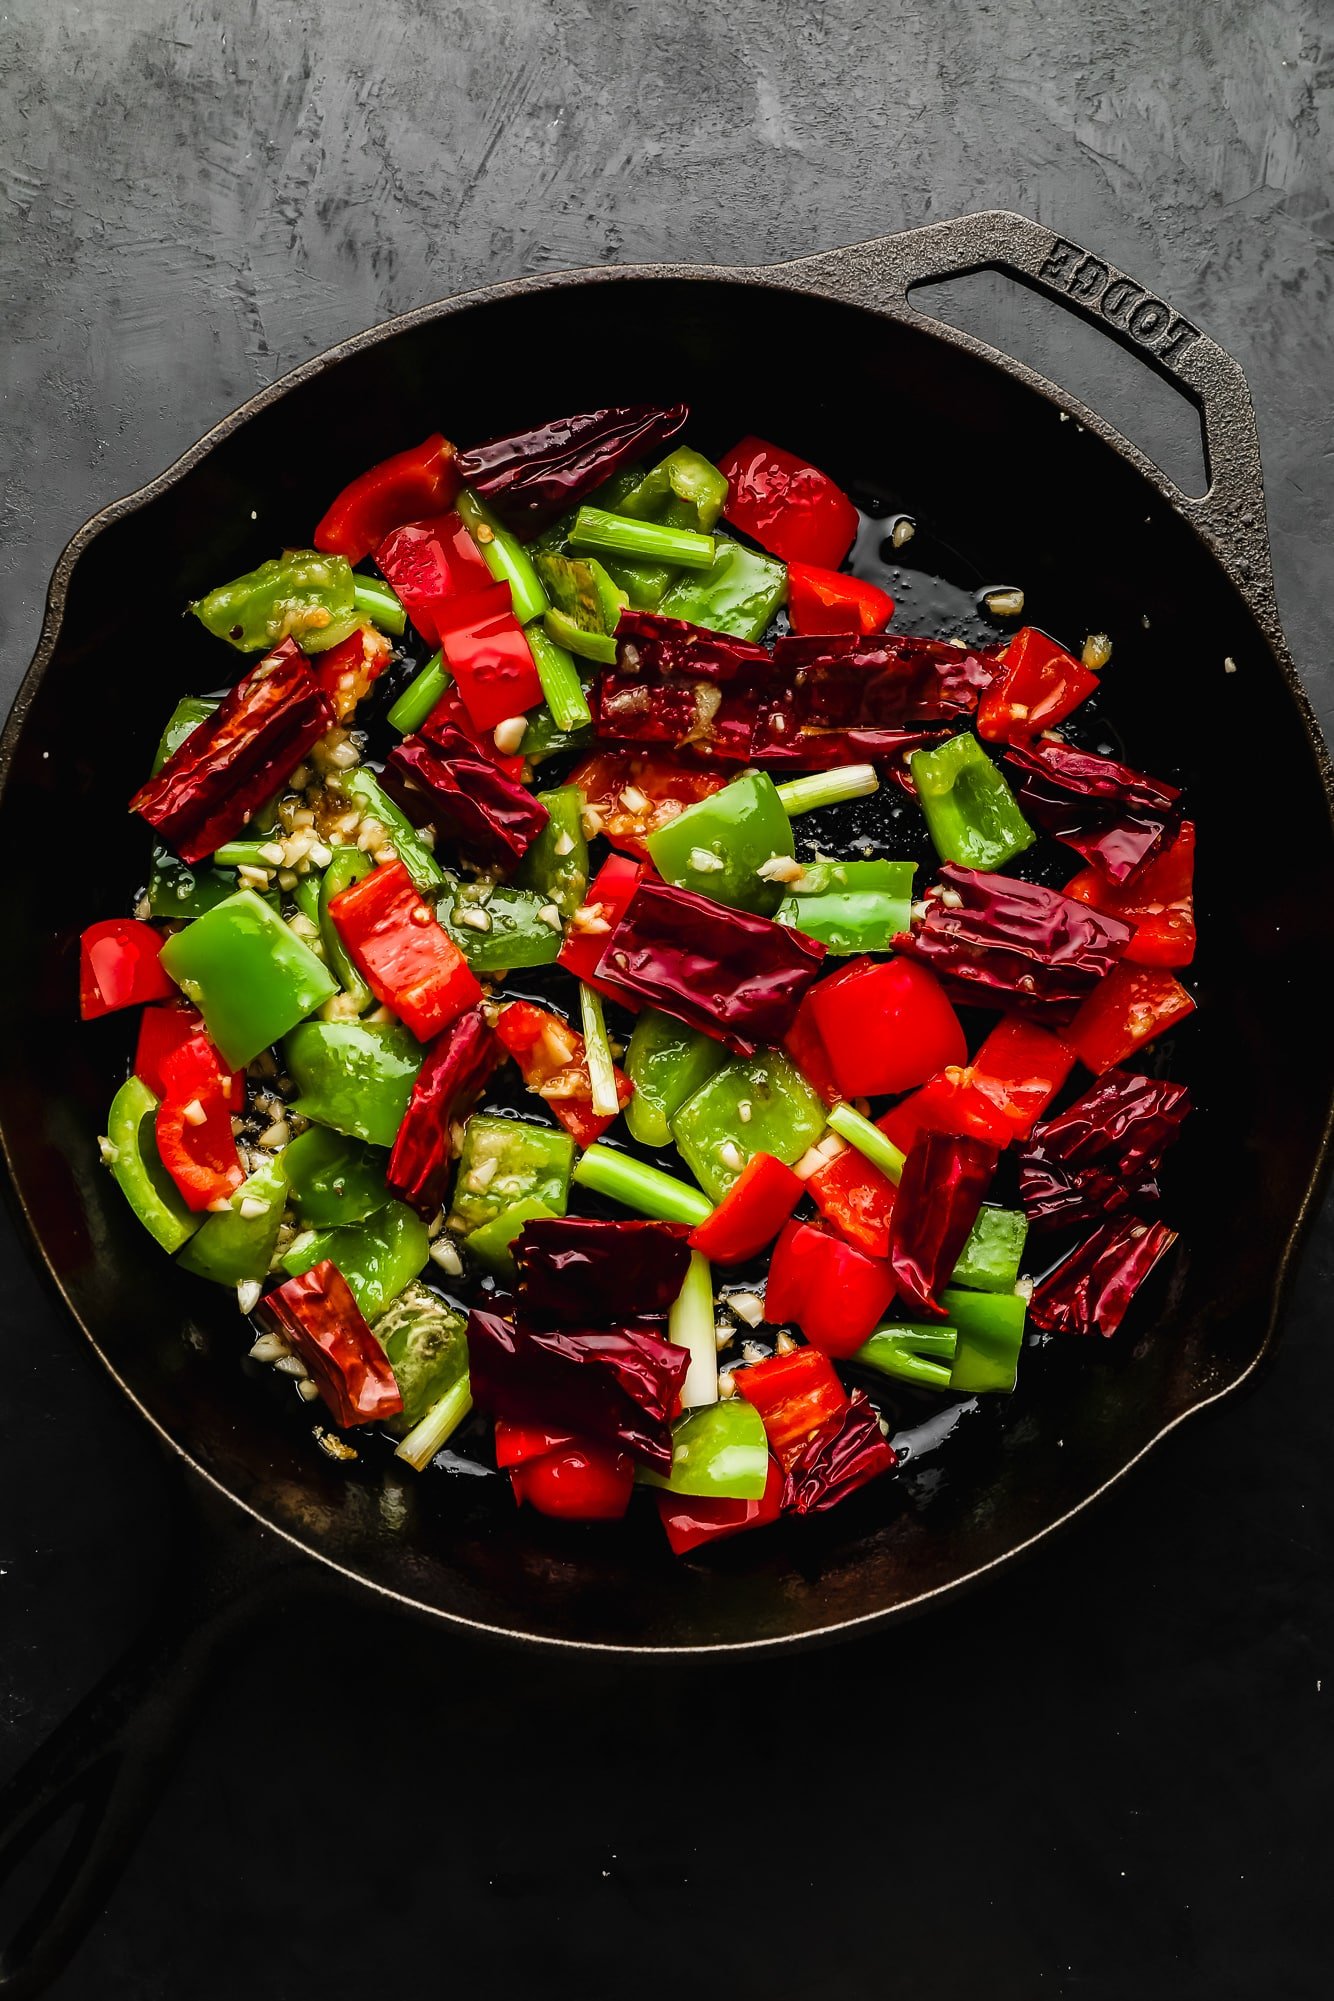 stir fried bell peppers and dried chili peppers in a black skillet.